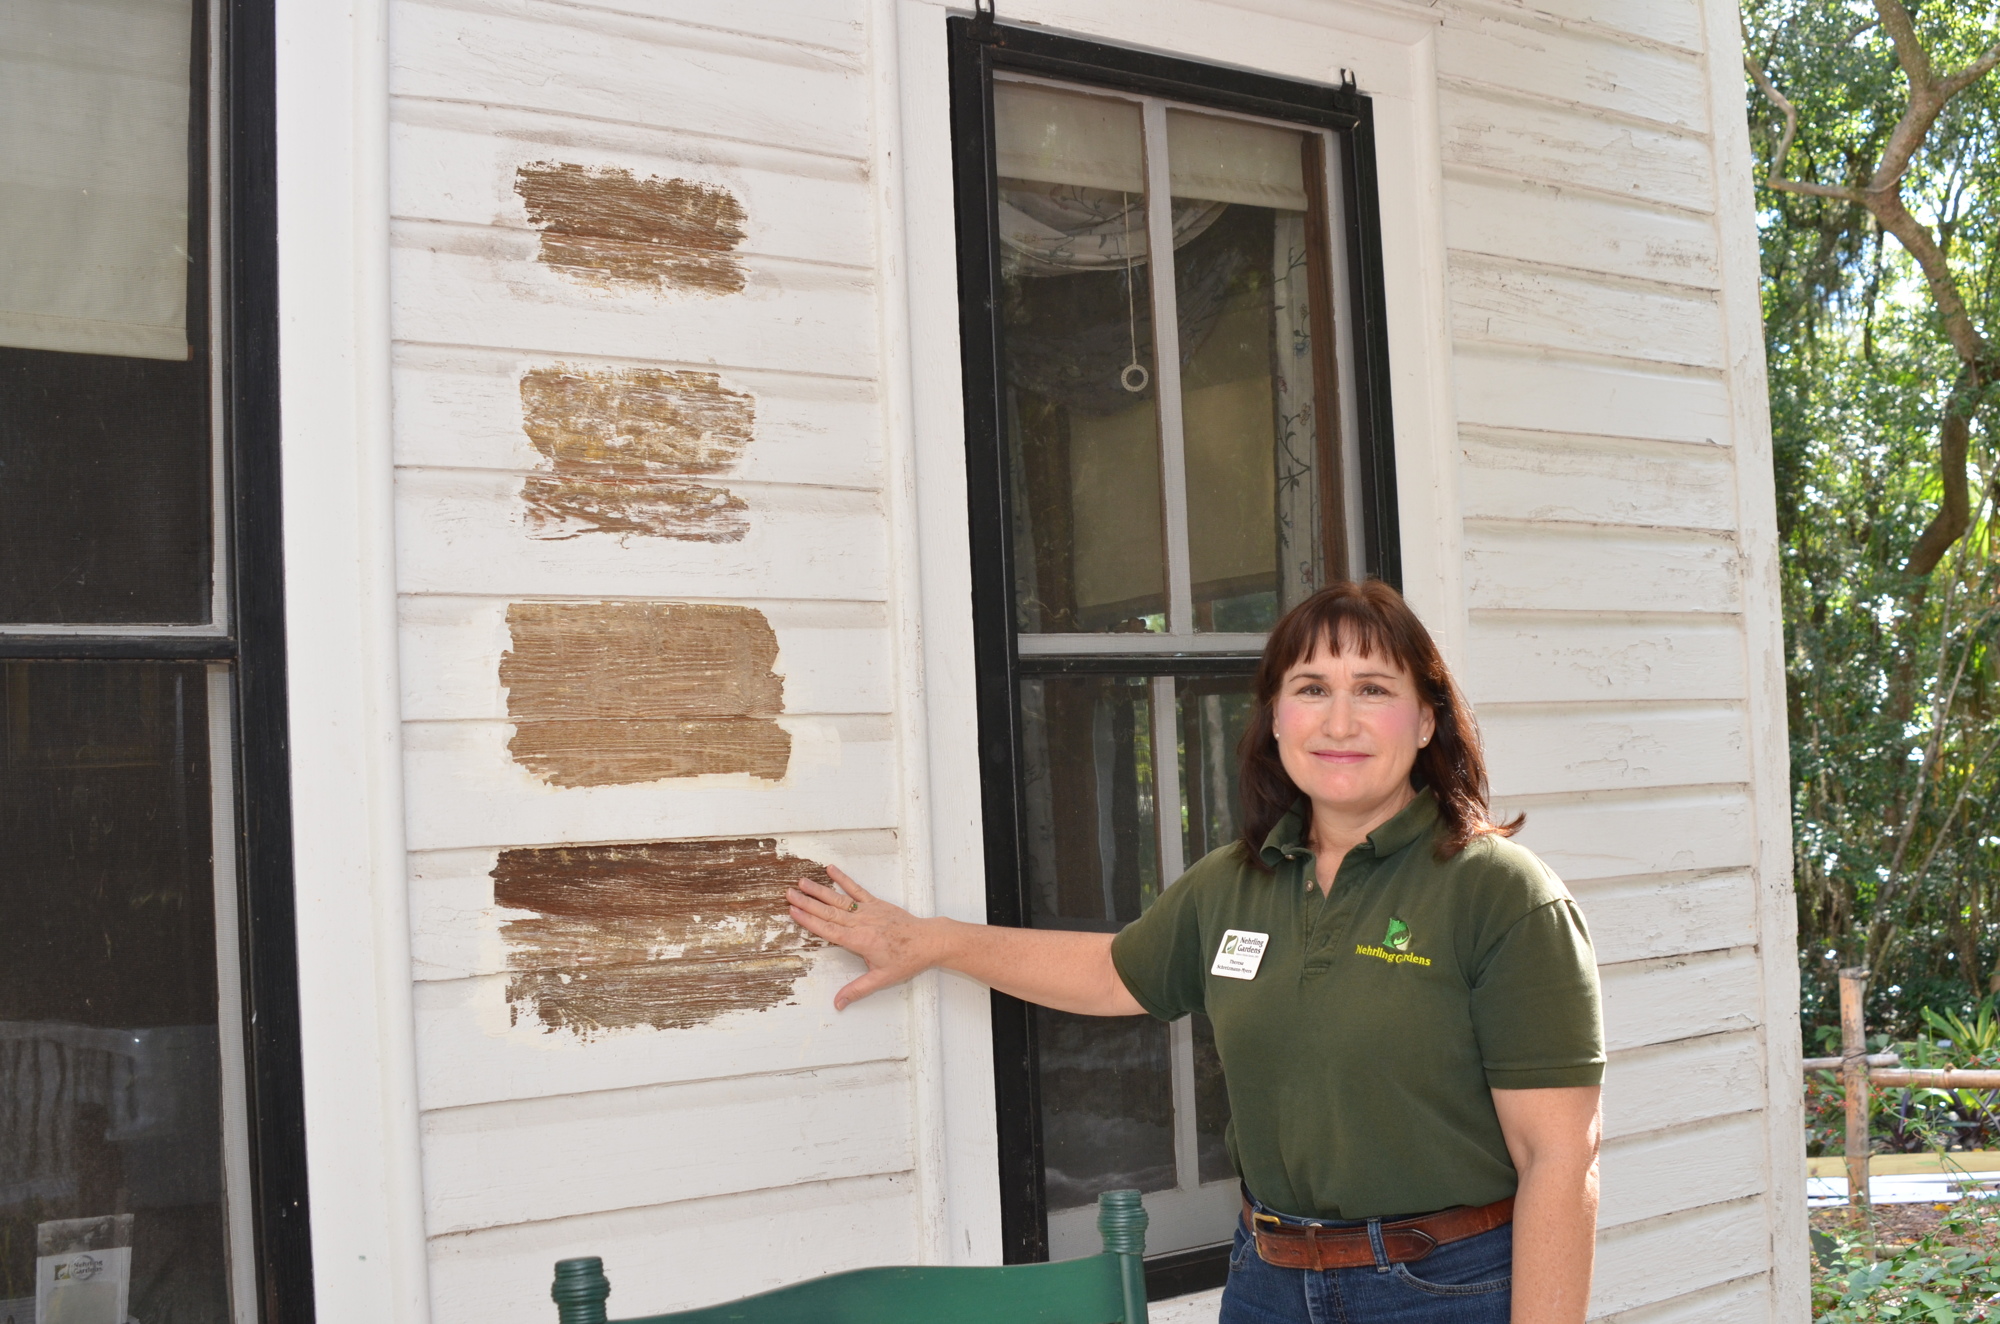 Theresa Schretzmann-Myers said a special technique must be used to remove the lead-based paint from the original wood. Four products were tested.